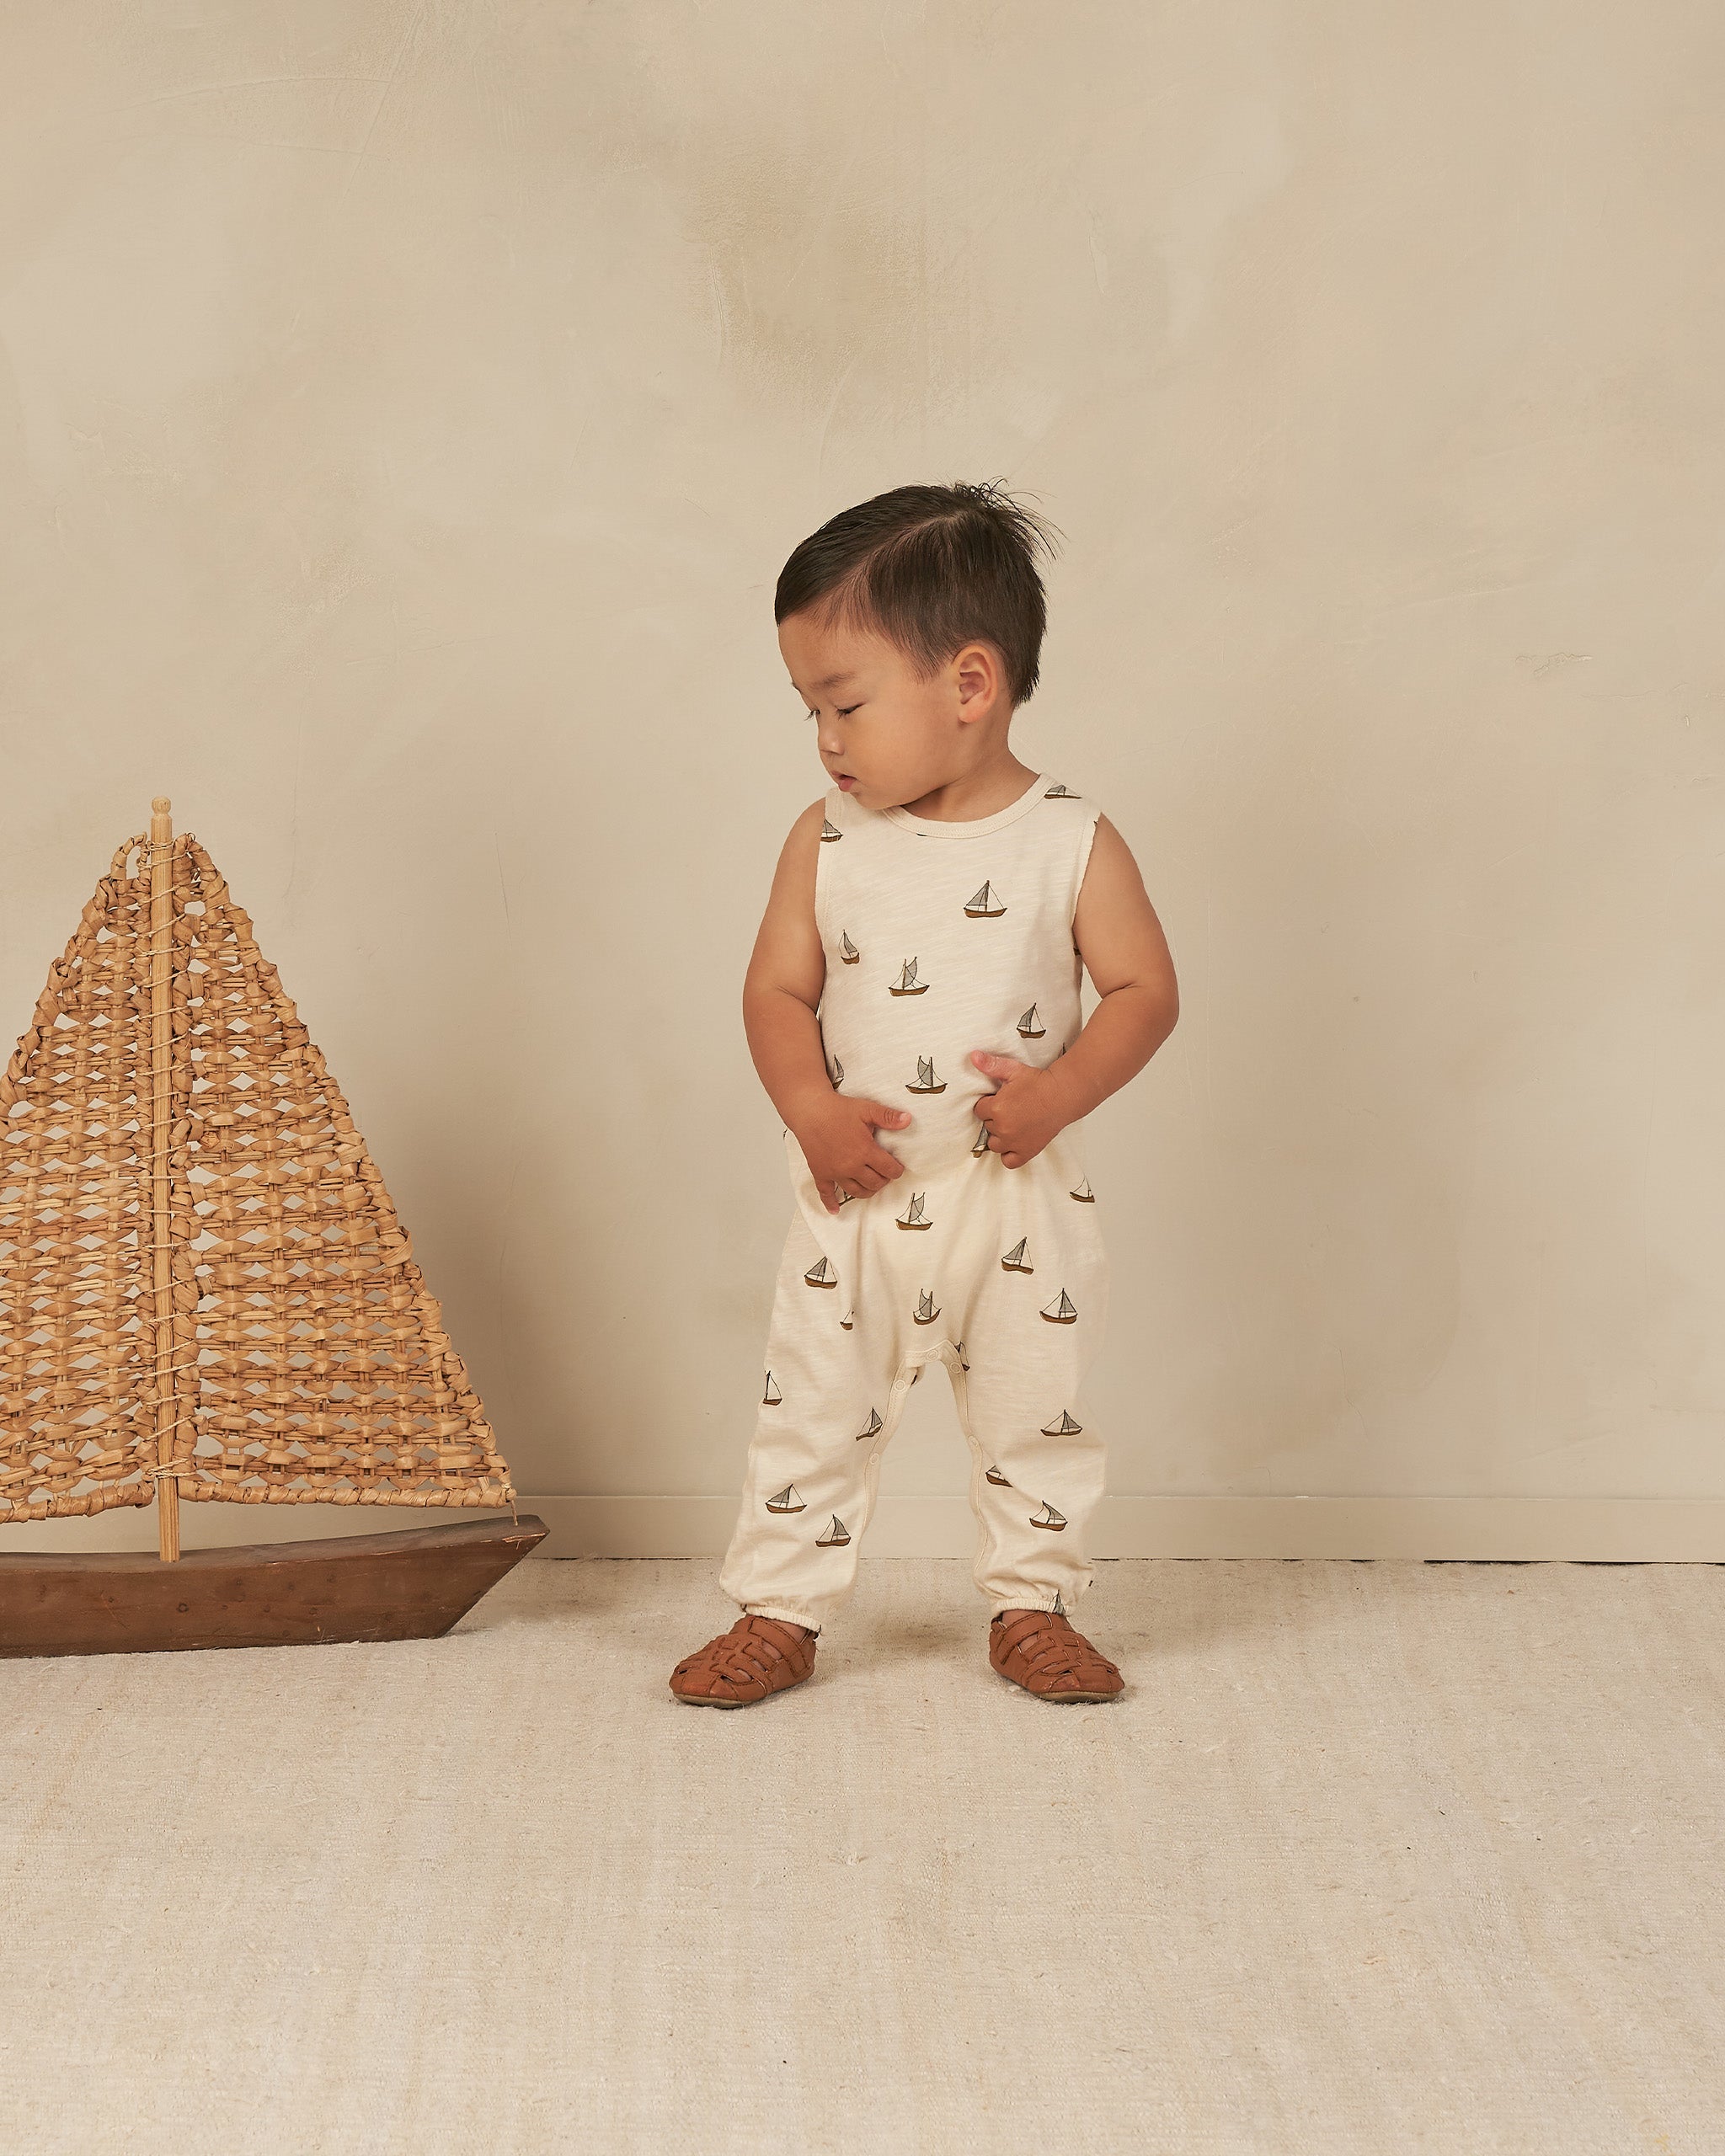 Mills Jumpsuit || Sailboats - Rylee + Cru | Kids Clothes | Trendy Baby Clothes | Modern Infant Outfits |